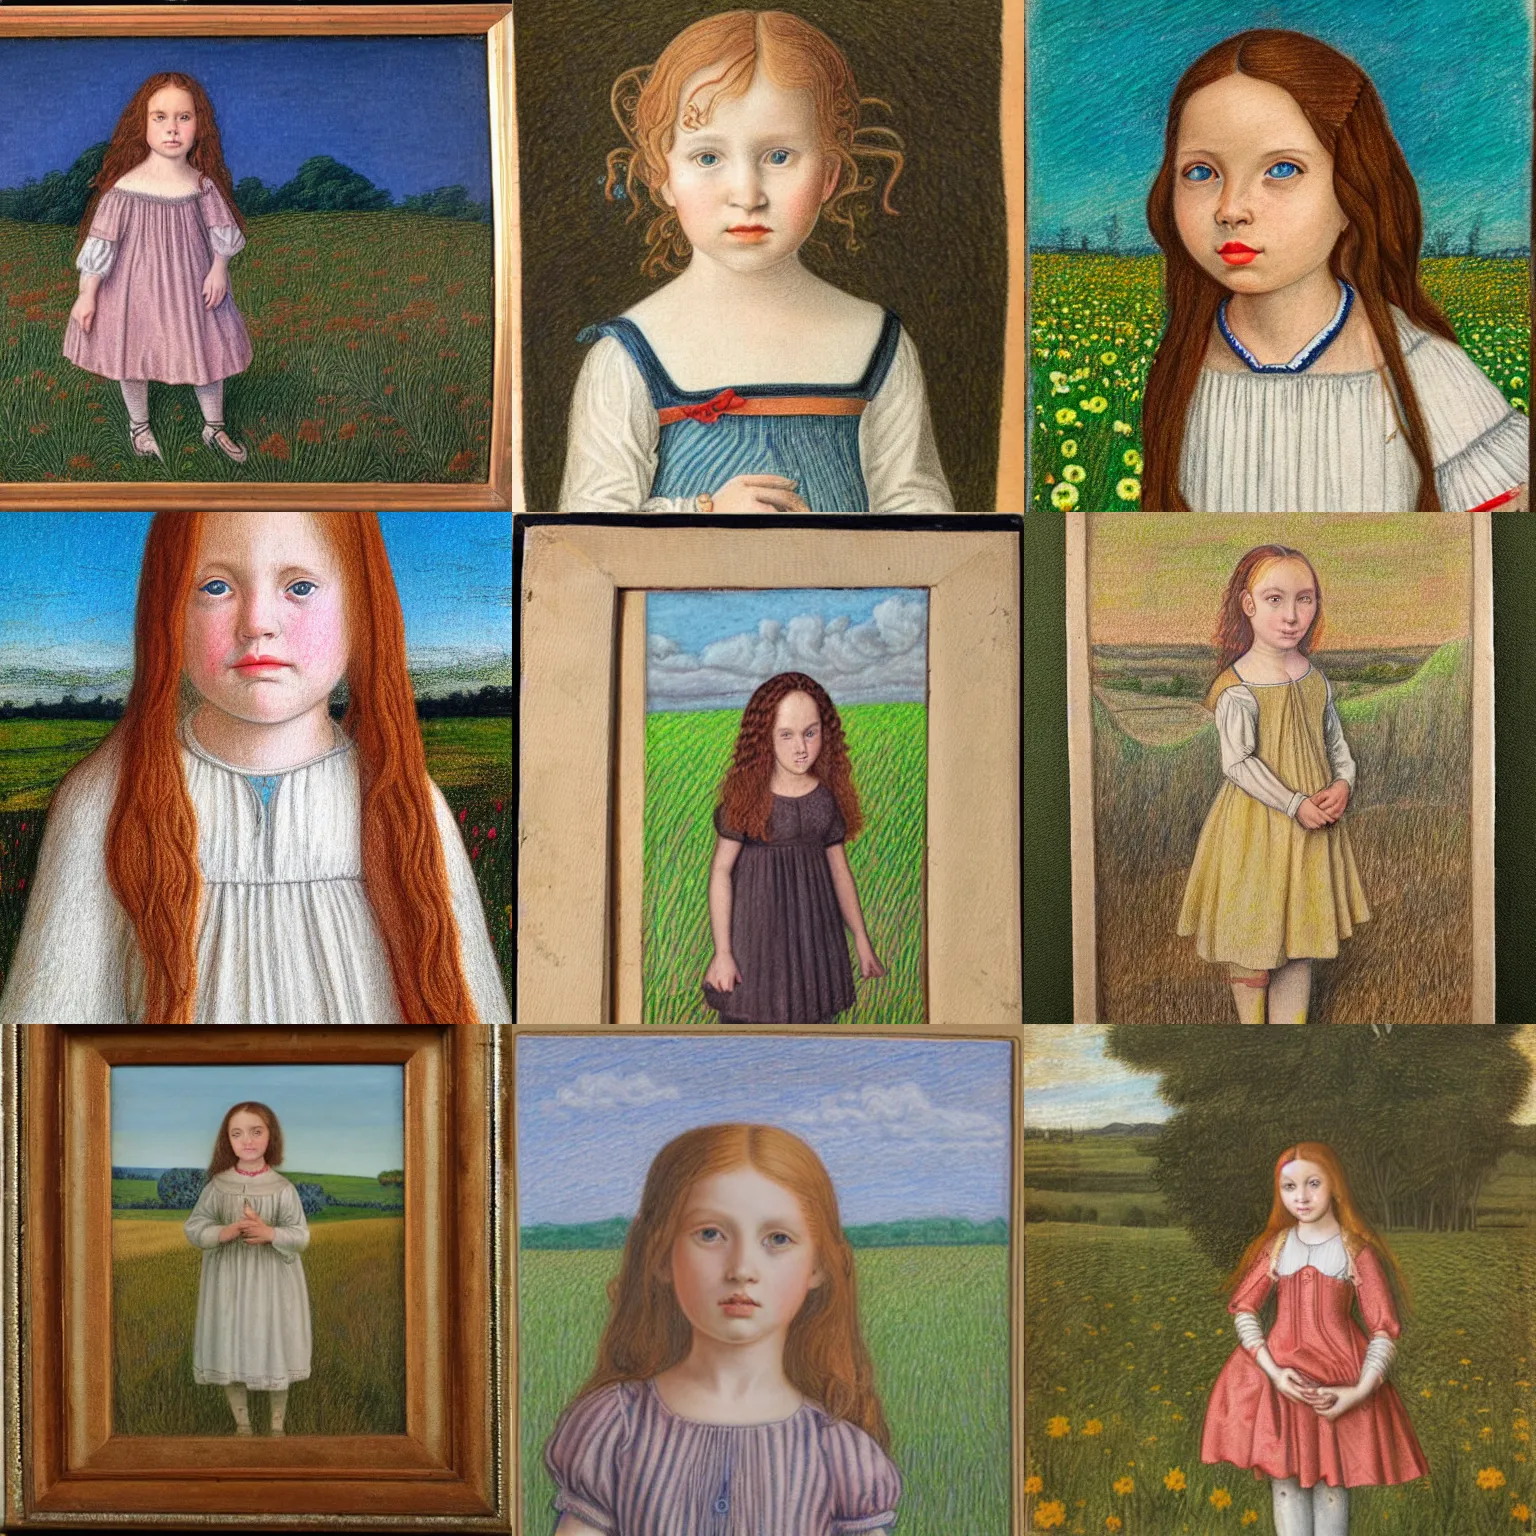 Prompt: 1 5 0 0 s portrait colored pencil drawing of curious girl standing in field looking at camera.